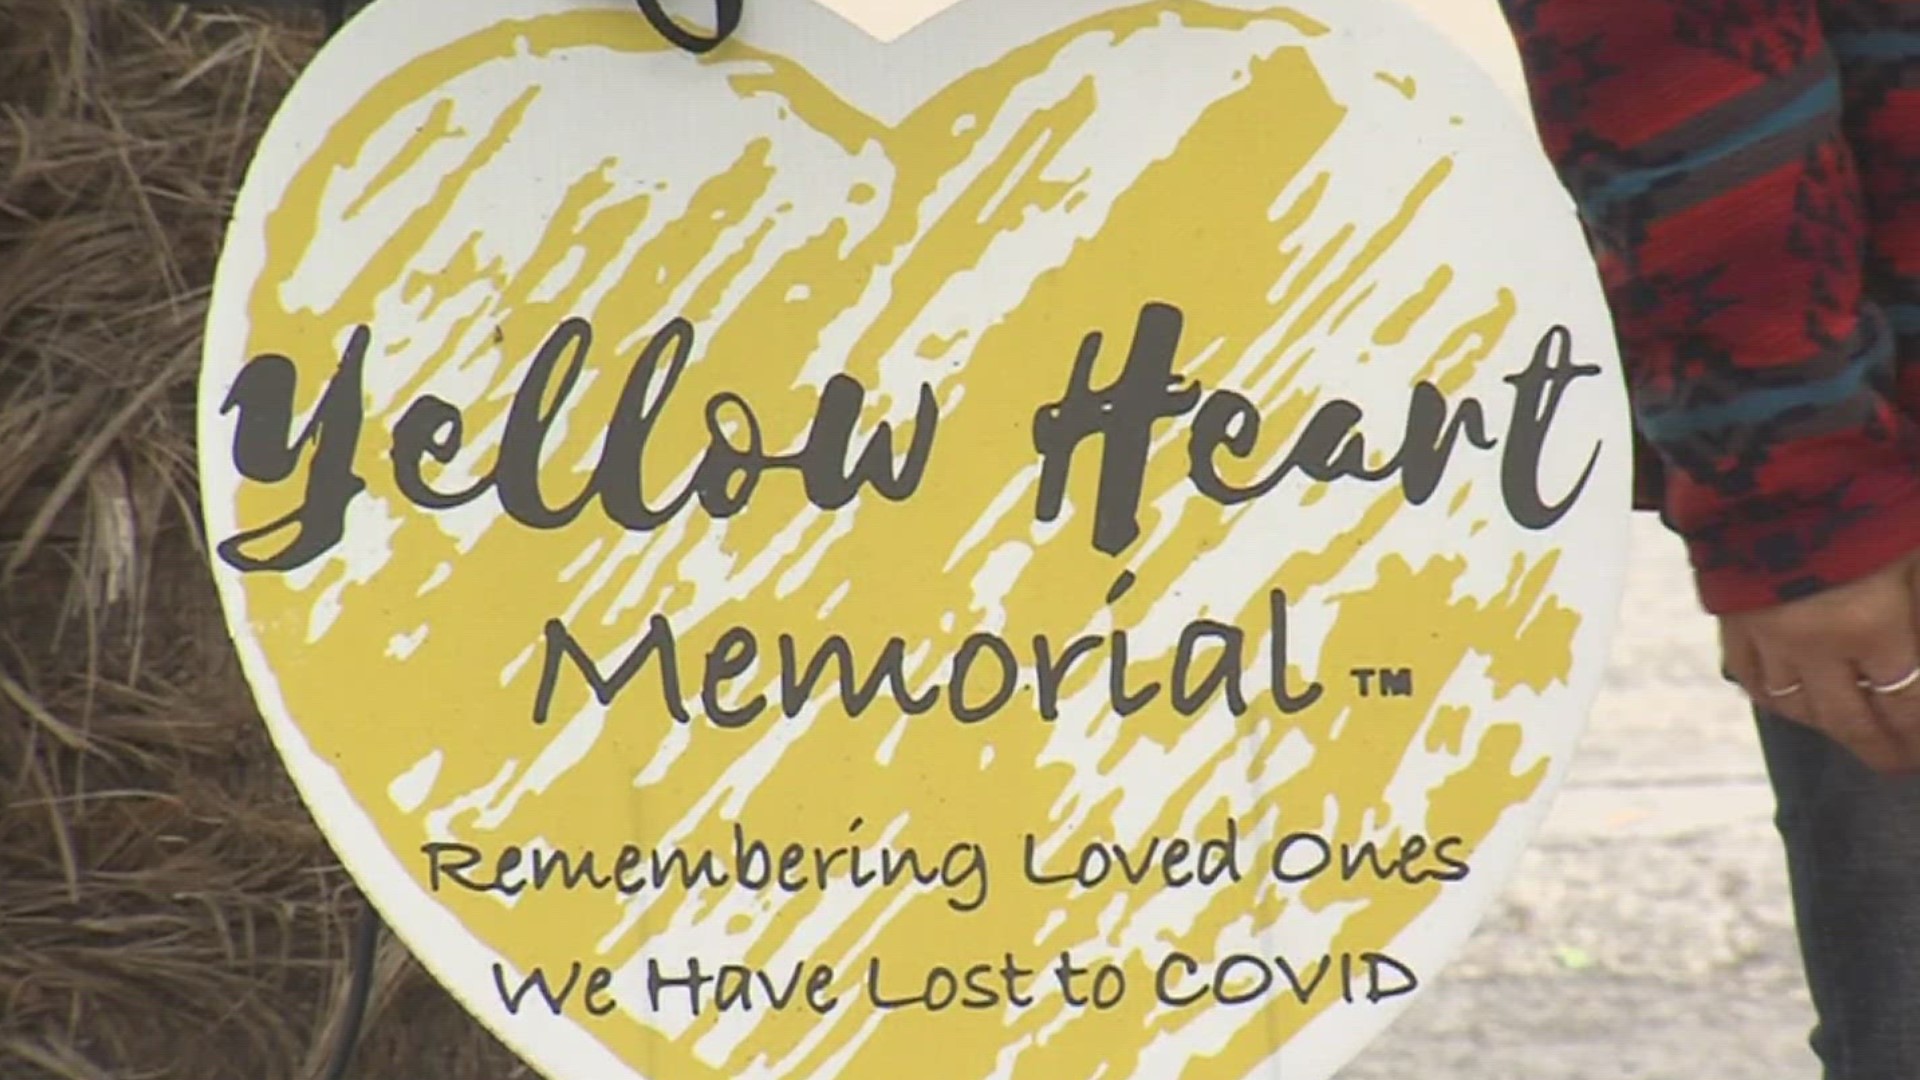 This sacred space is more than just a place to honor lives lost from covid, but a way to ensure family members their loved ones will never be forgotten.